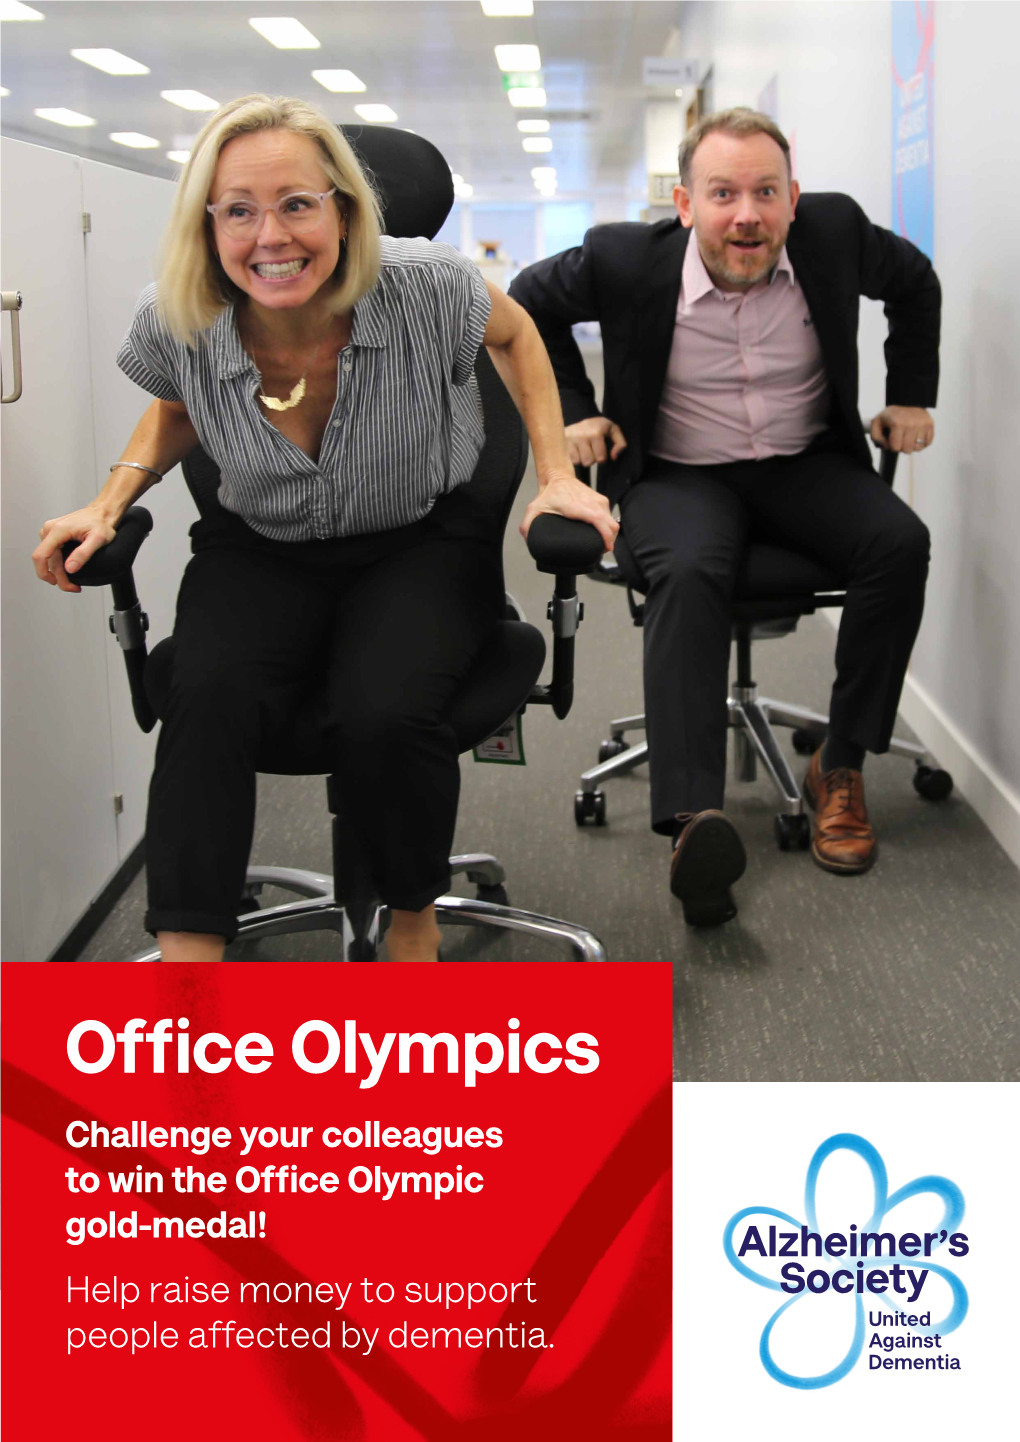 Office Olympics Challenge Your Colleagues to Win the Office Olympic Gold-Medal! Help Raise Money to Support People Affected by Dementia